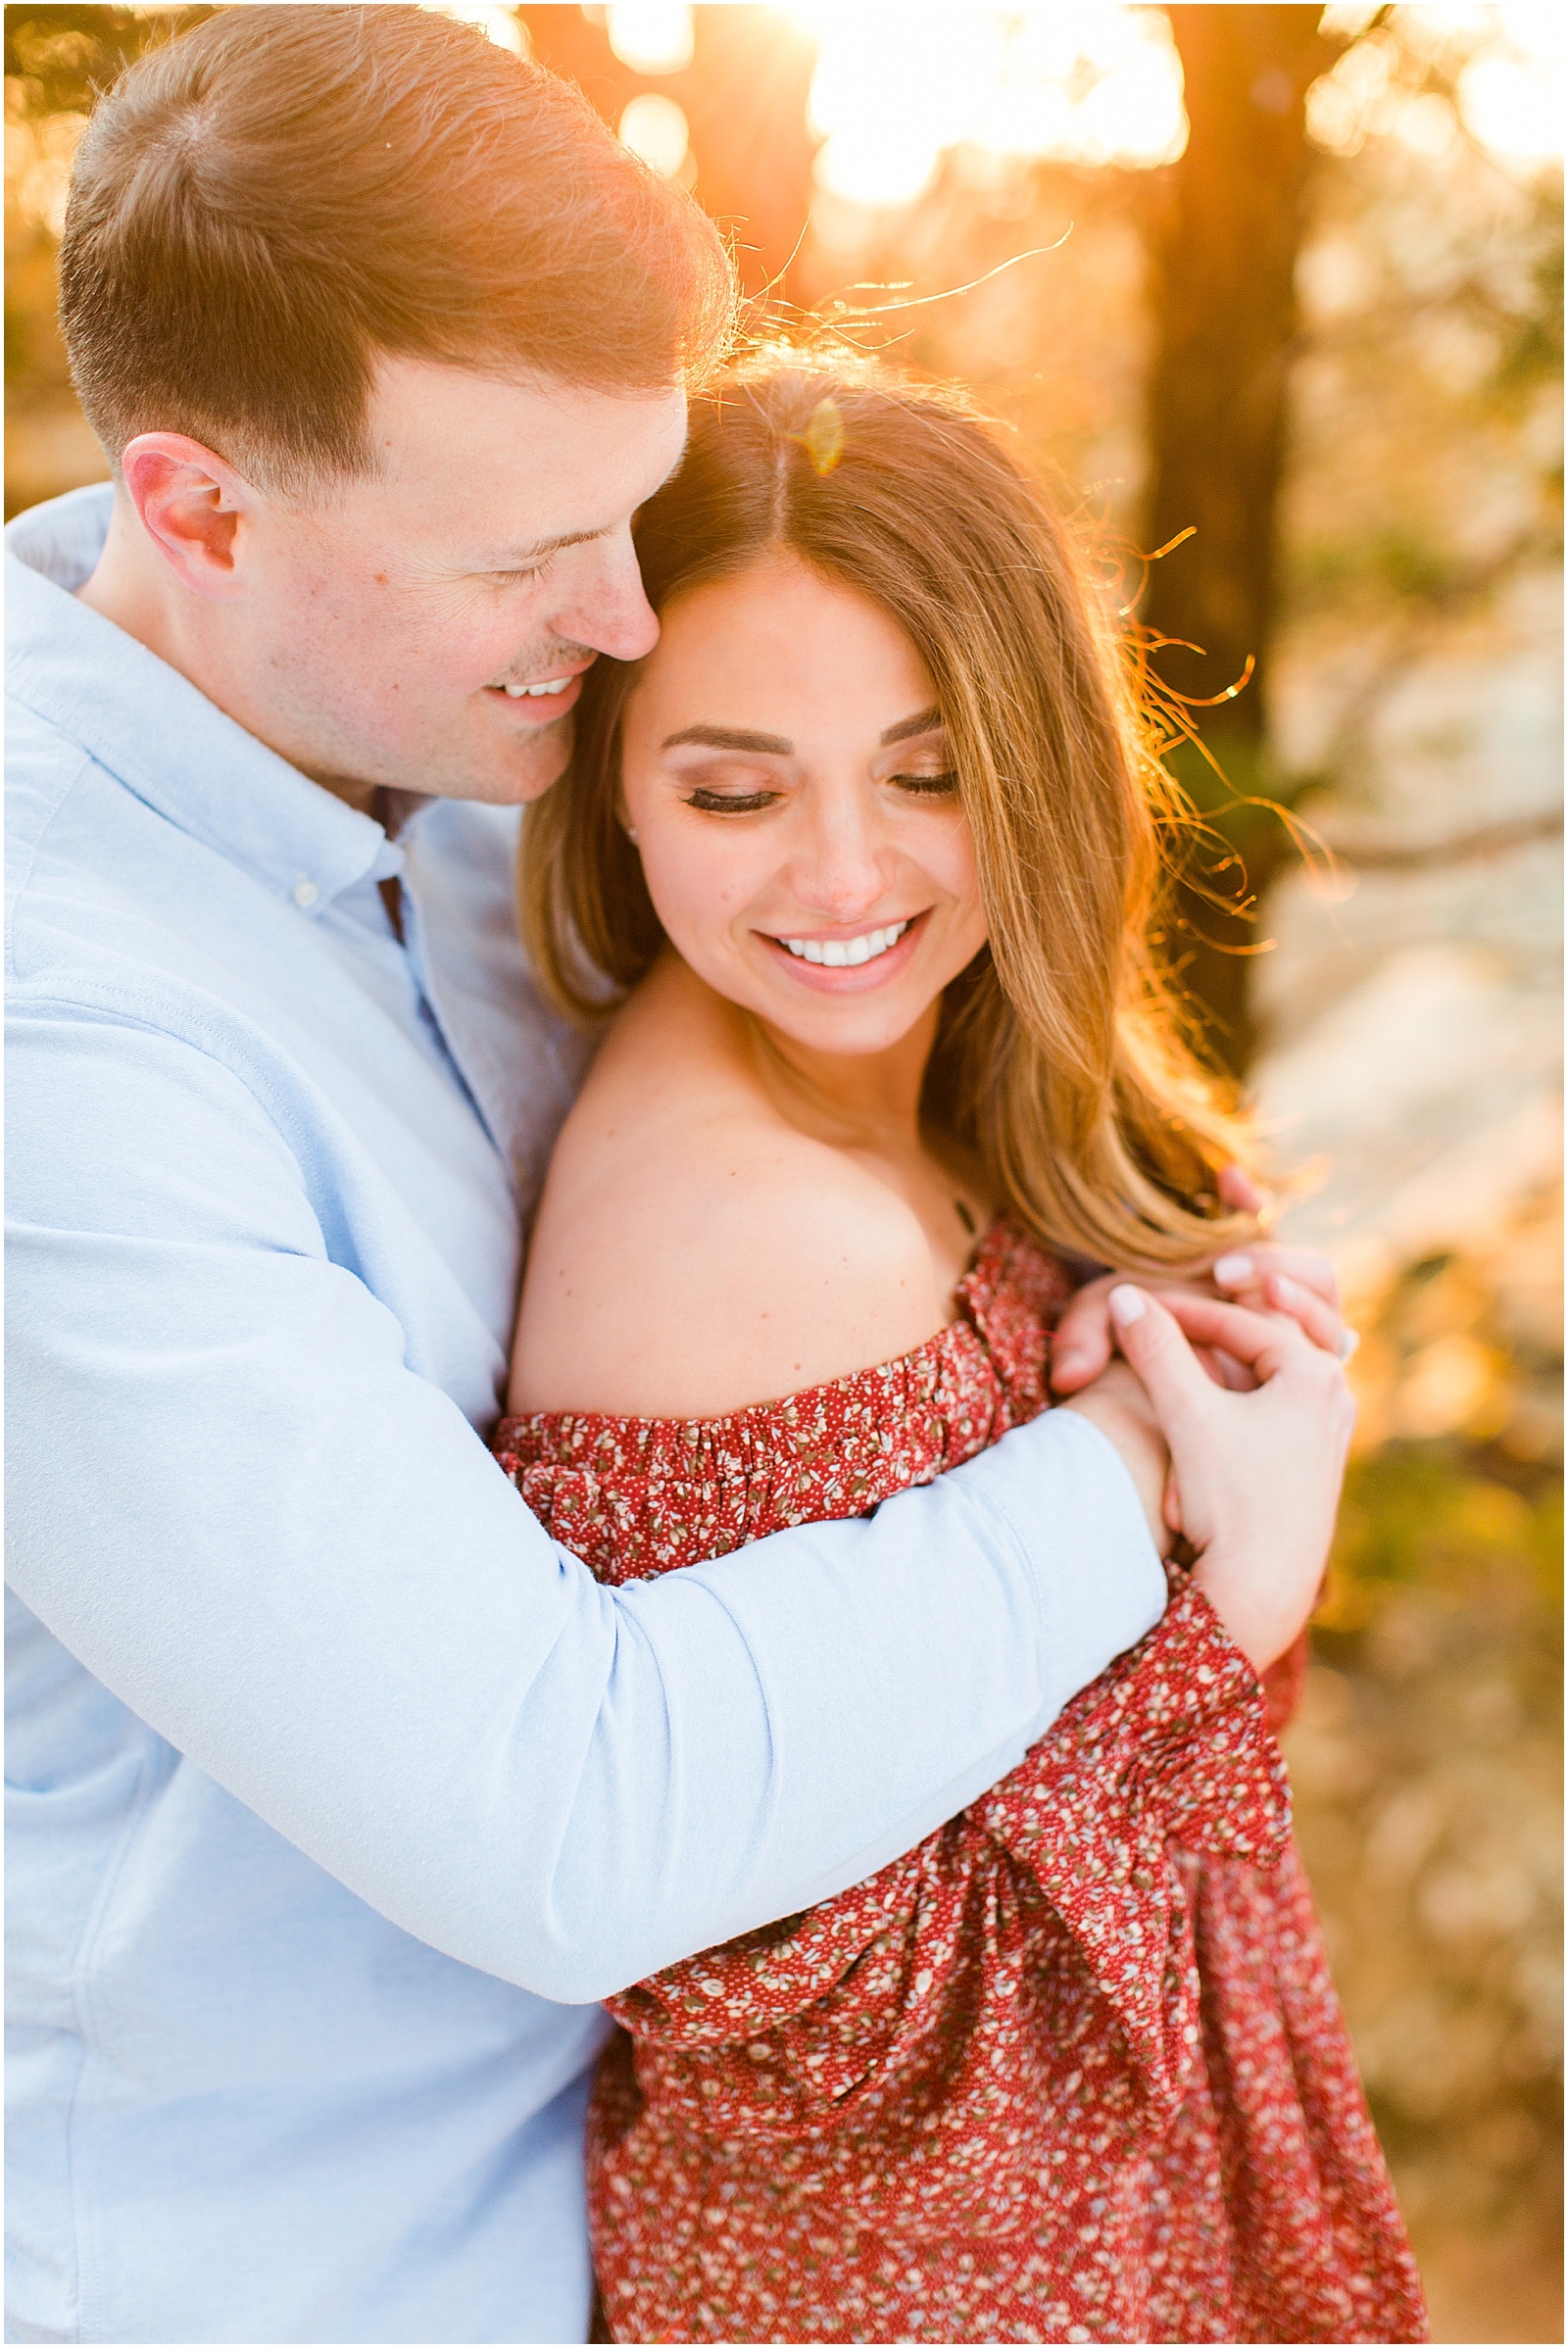 A Sunny Garden of the Gods Engagement Session | Shiloh and Lee | Bret and Brandie Photography075.jpg